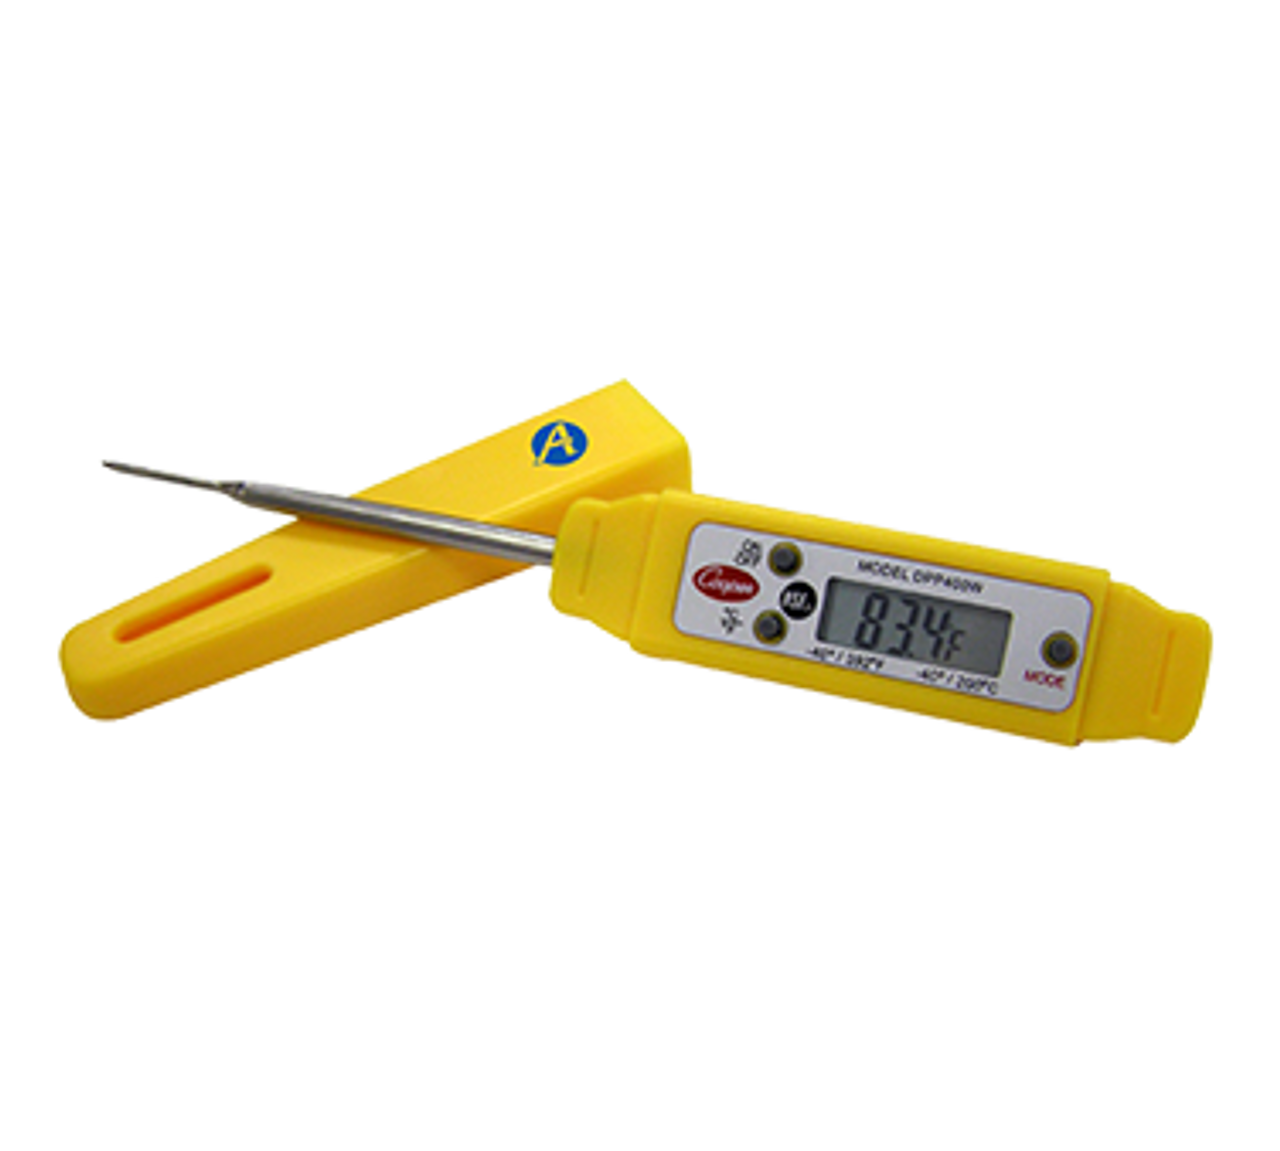 Digital Probe Thermometer w/ Timer, 32 to 392F